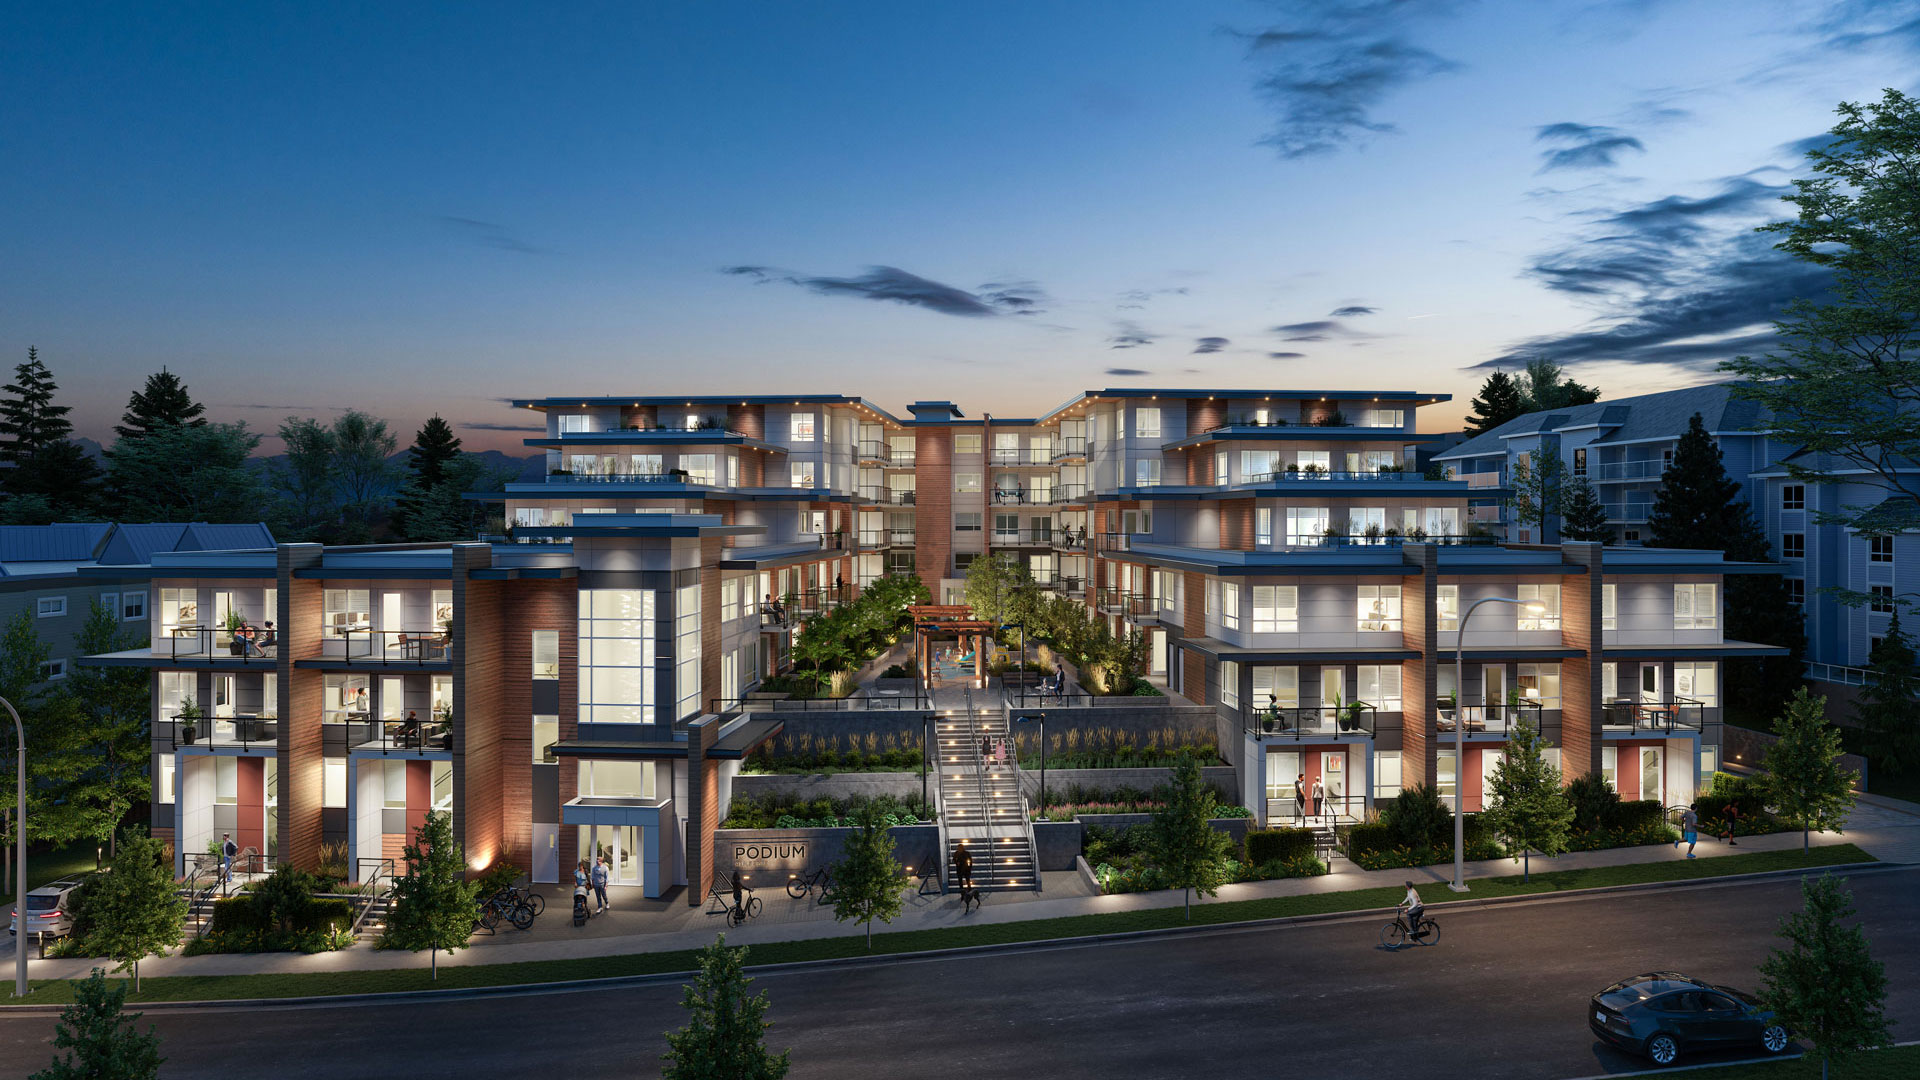 A collection of 120 condominiums and 5 townhomes coming soon to West Central Maple Ridge.